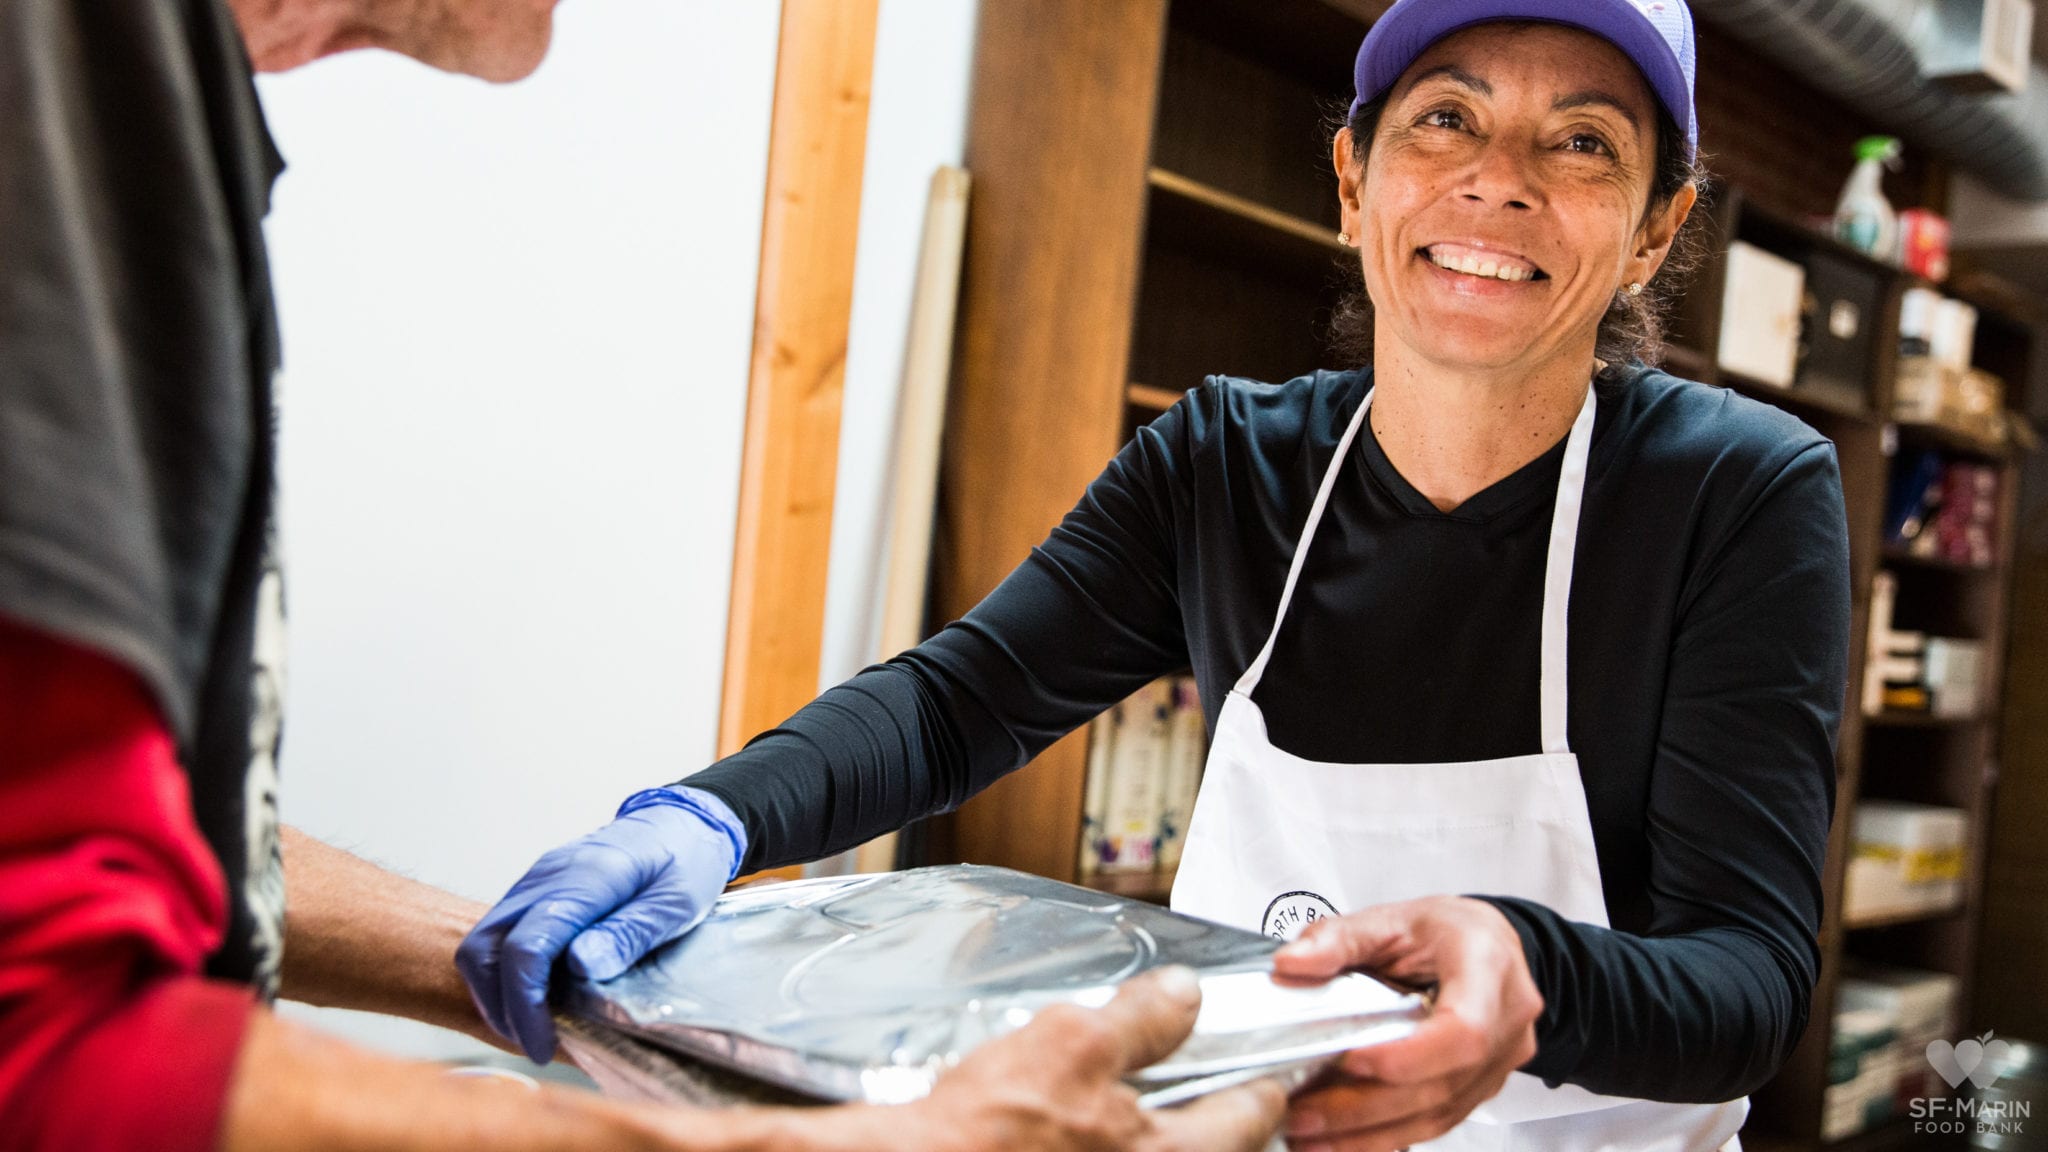 An SF Marin food bank volunteer in a white apron handing out a meal with a smile on her face